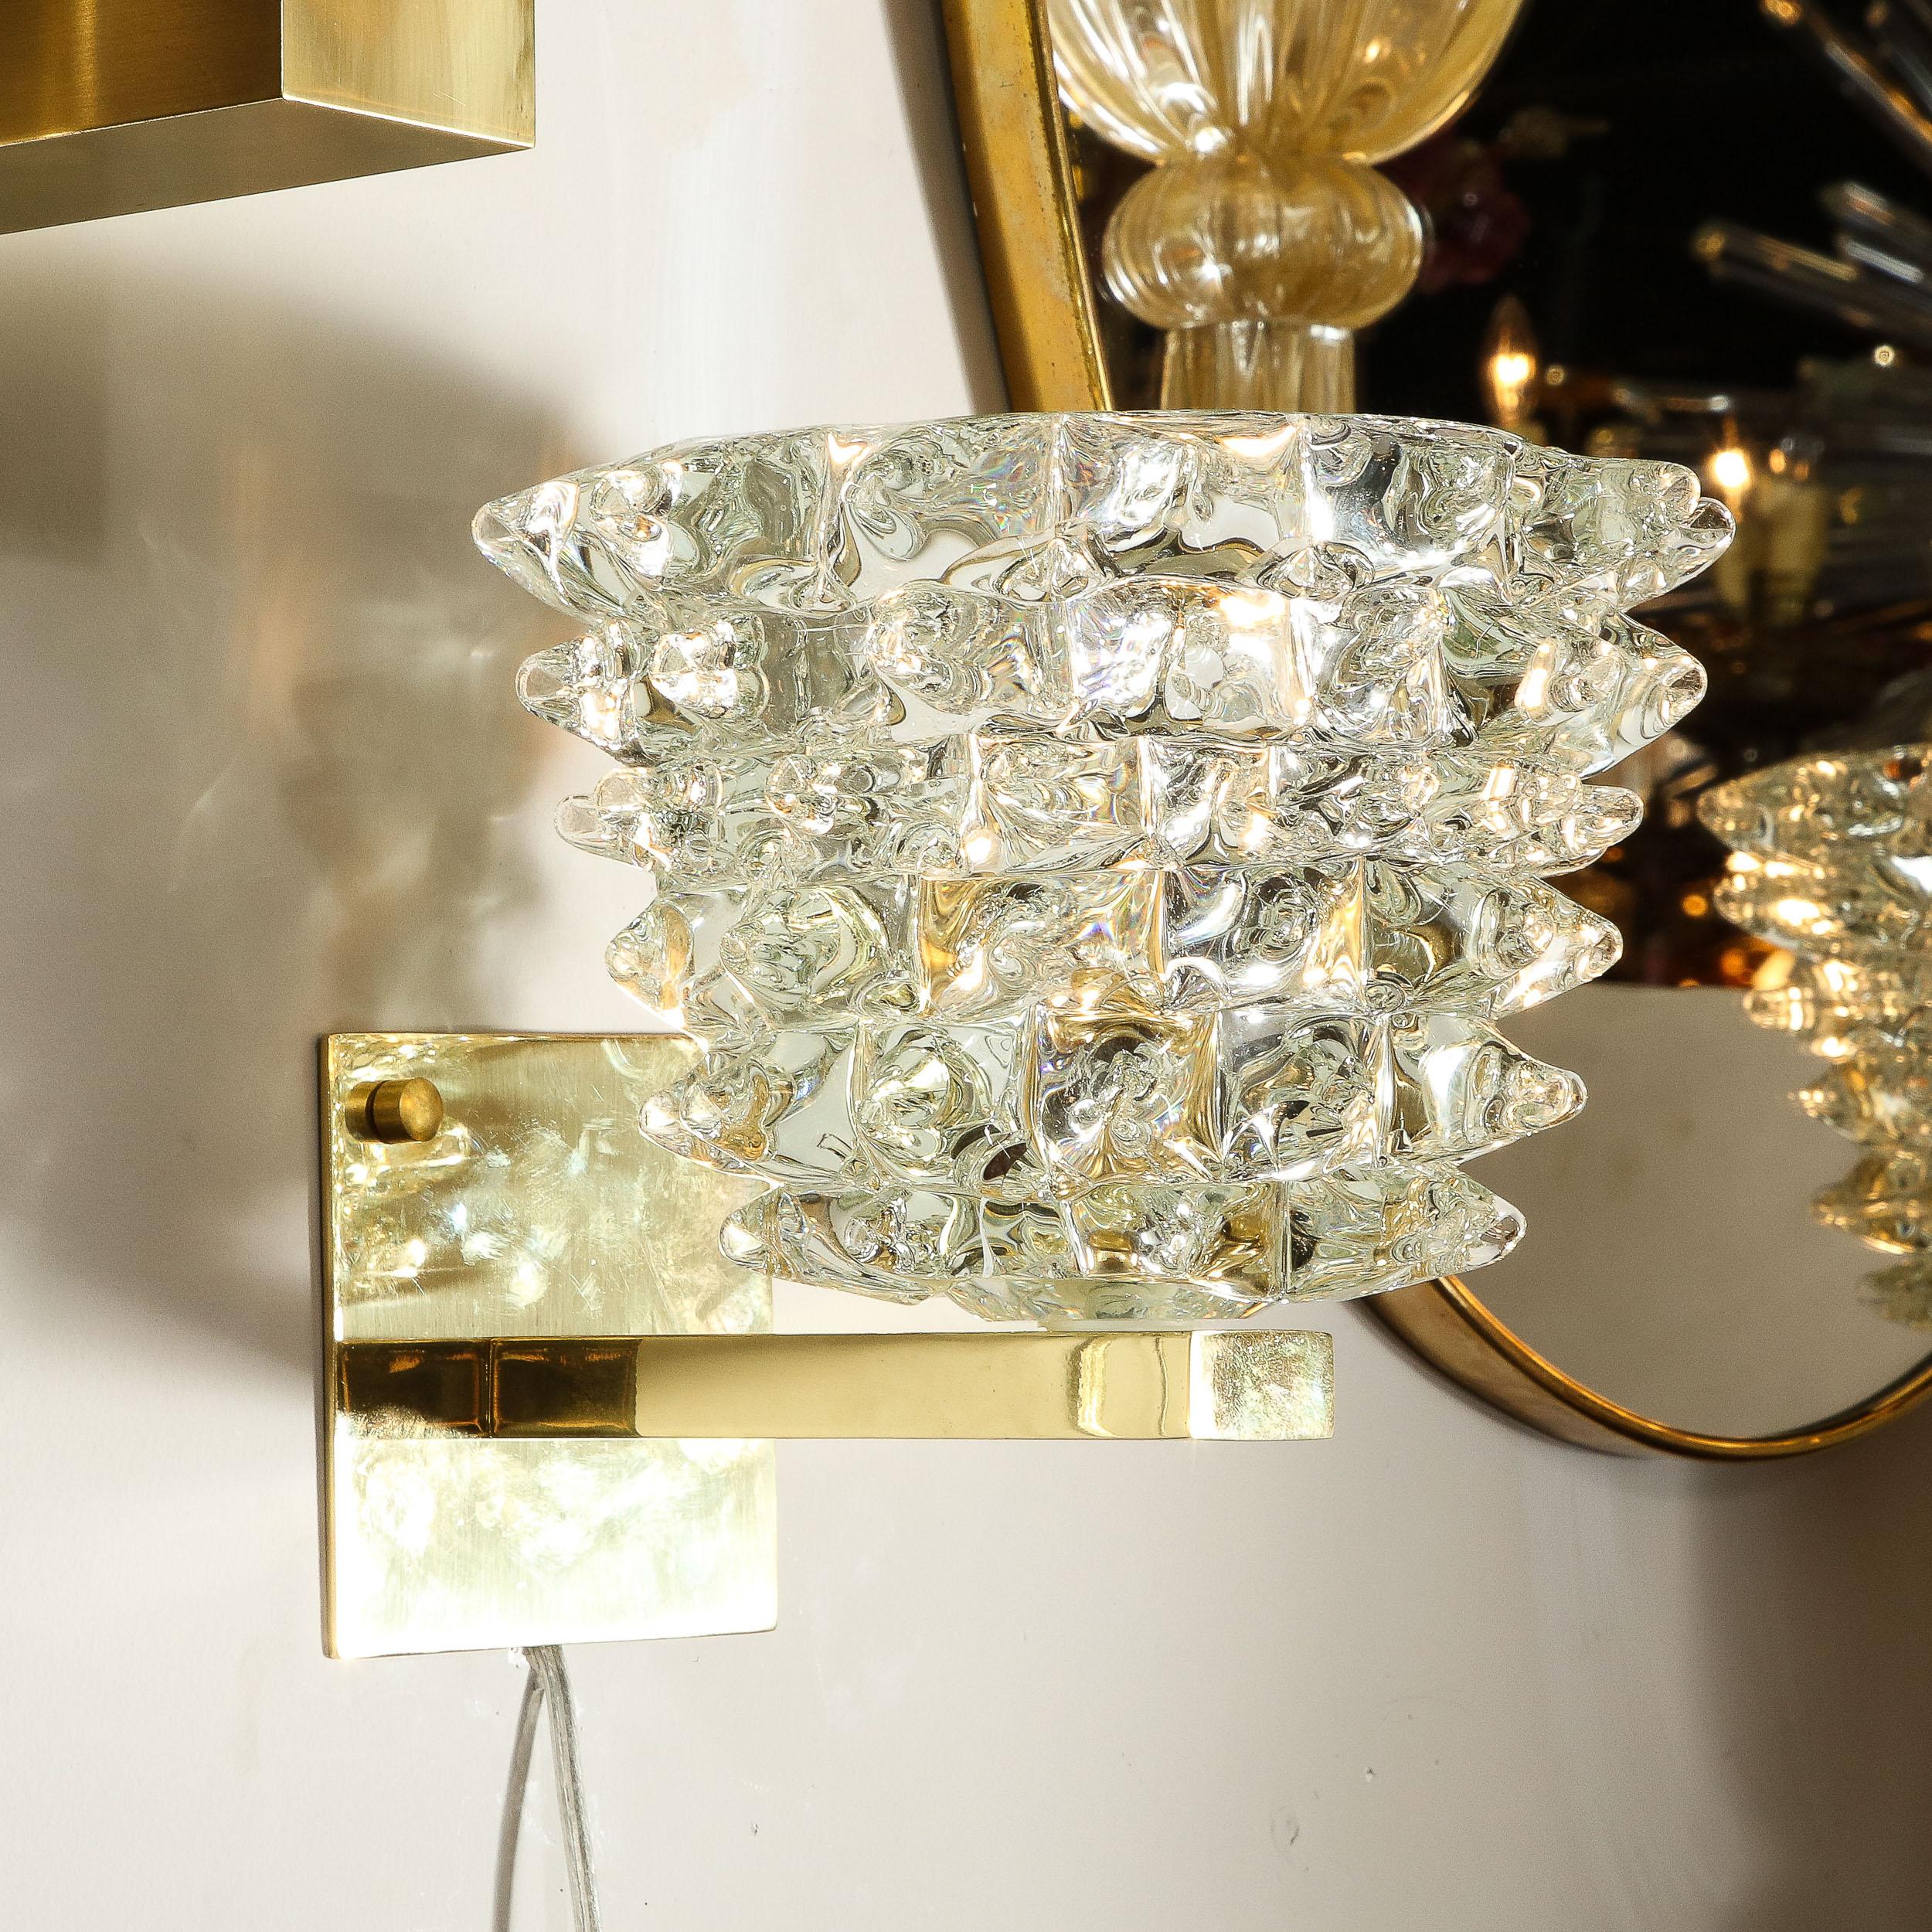 Pair of Modernist Transparent Murano Glass & Brass Sconces w/ Rostrato Detailing For Sale 4